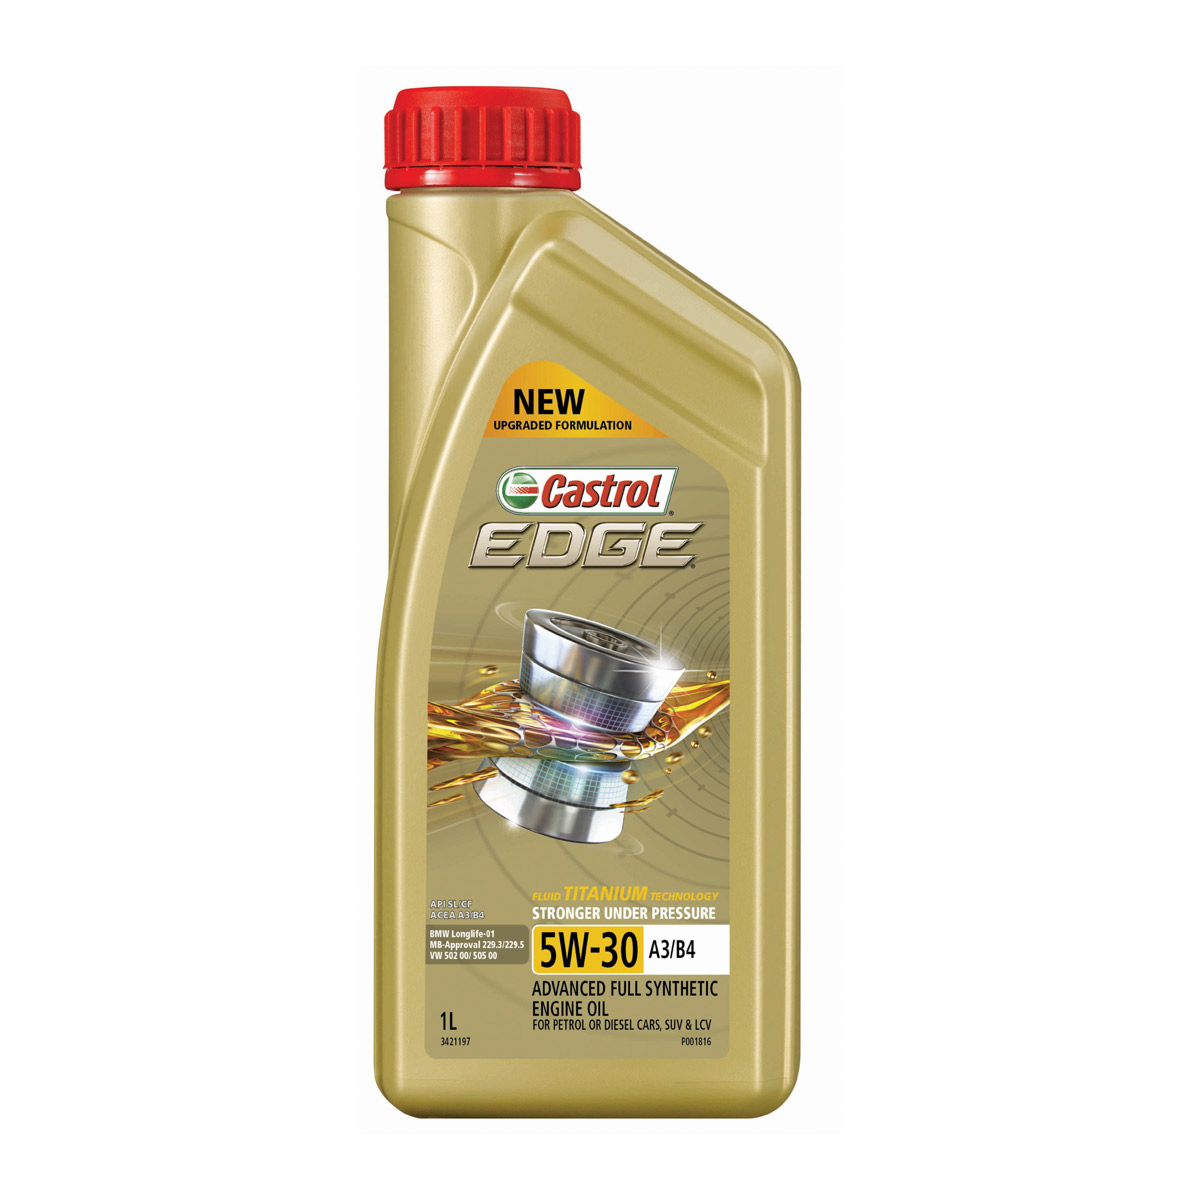 Castrol Edge Full Synthetic Engine Oil 5W-30 A3/B4 1L - 3421197 - Auto One